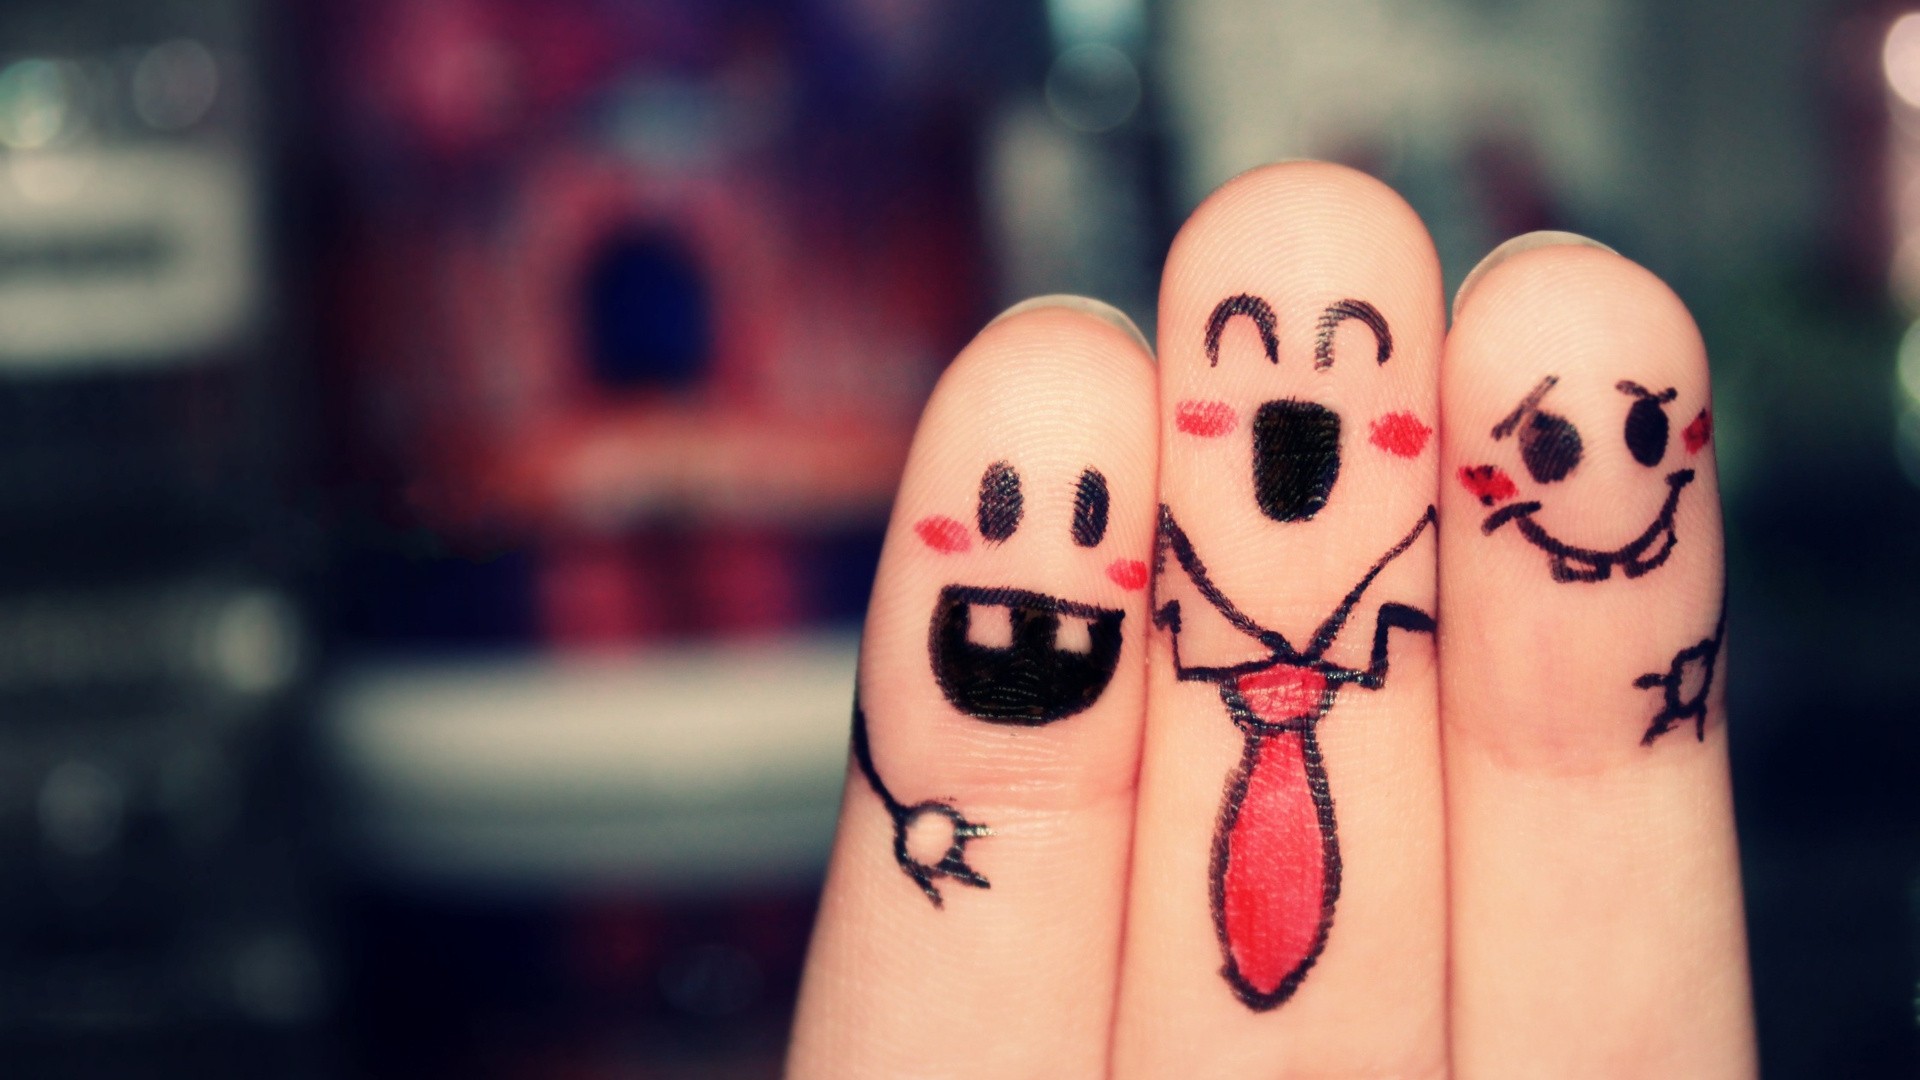 friends wallpaper,finger,facial expression,nail,friendship,smile